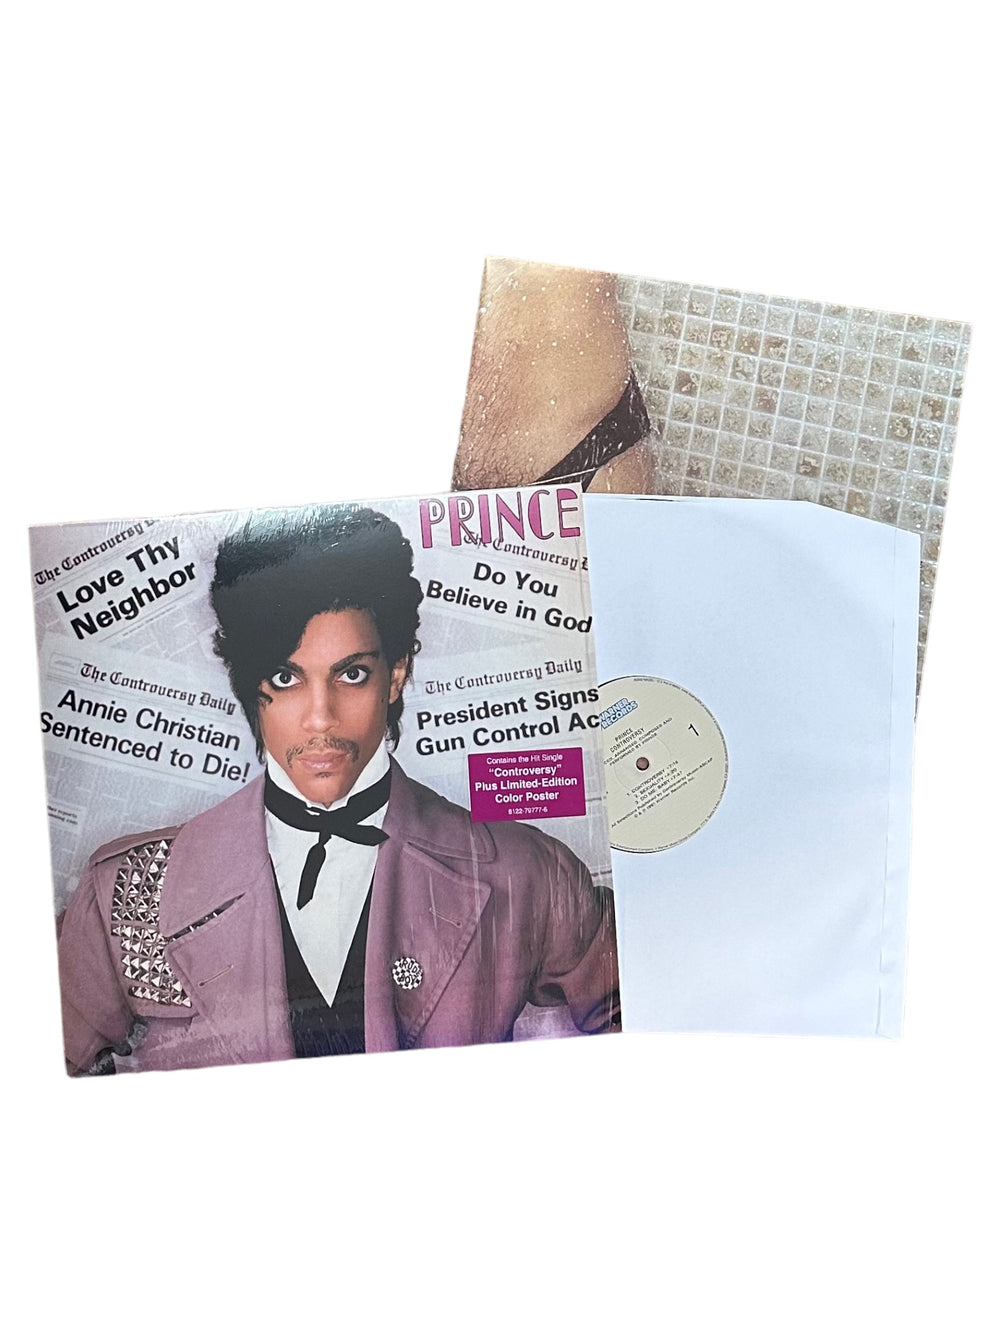 Prince – Controversy Vinyl Album With Poster 180g Reissue NEW : 2011